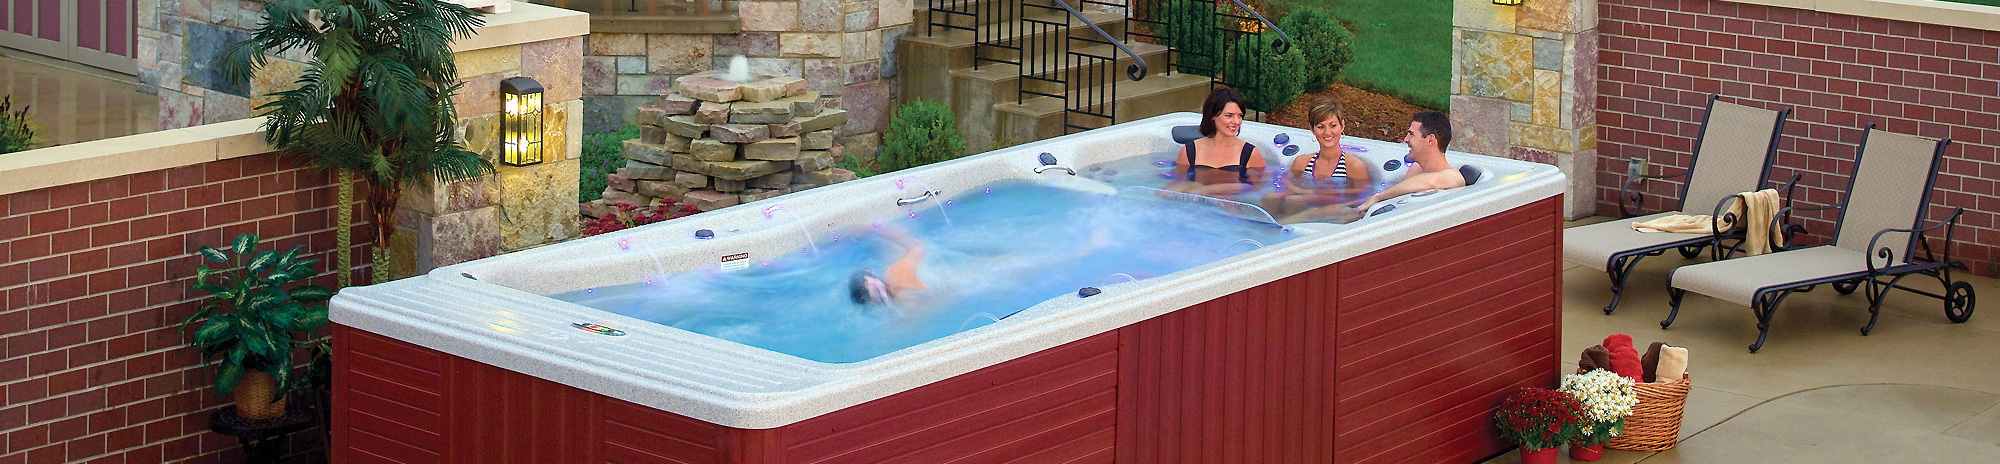 Spa Platinum Pro Hot Tub Spa And Pool Products All Made With Natural